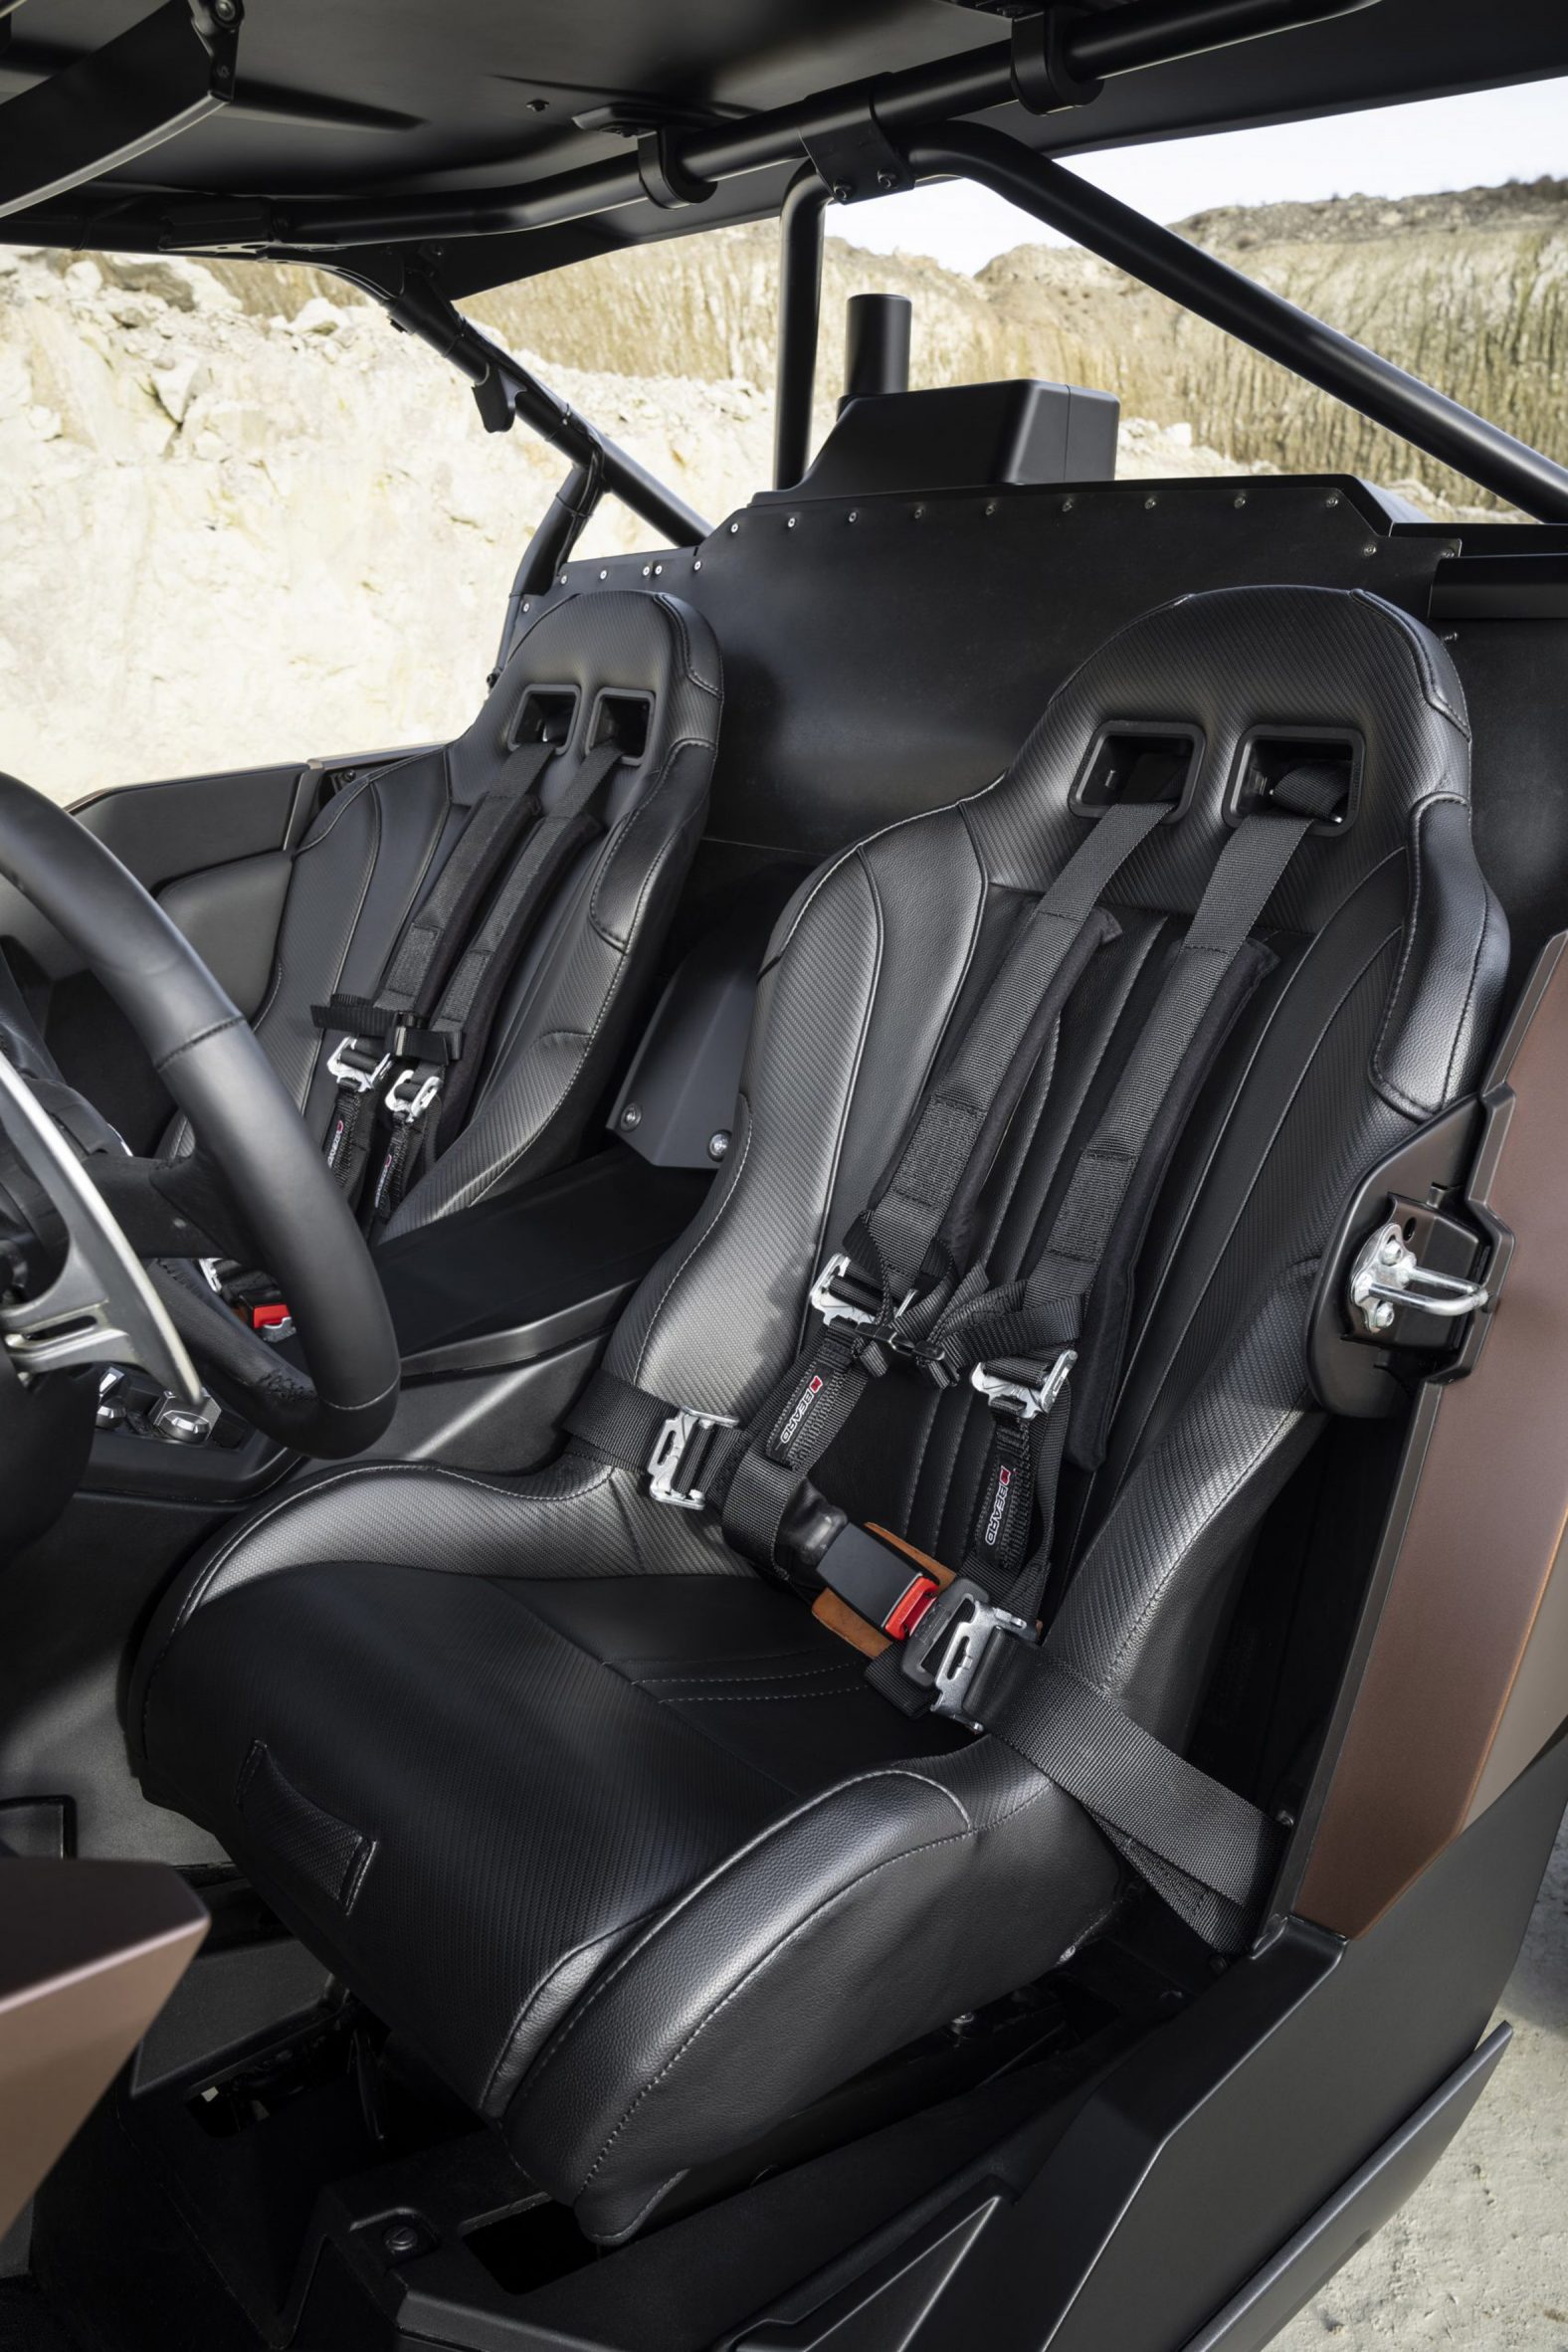 Fake leather seats with five-point seatbelts in hydrogen-powered buggy by Lexus